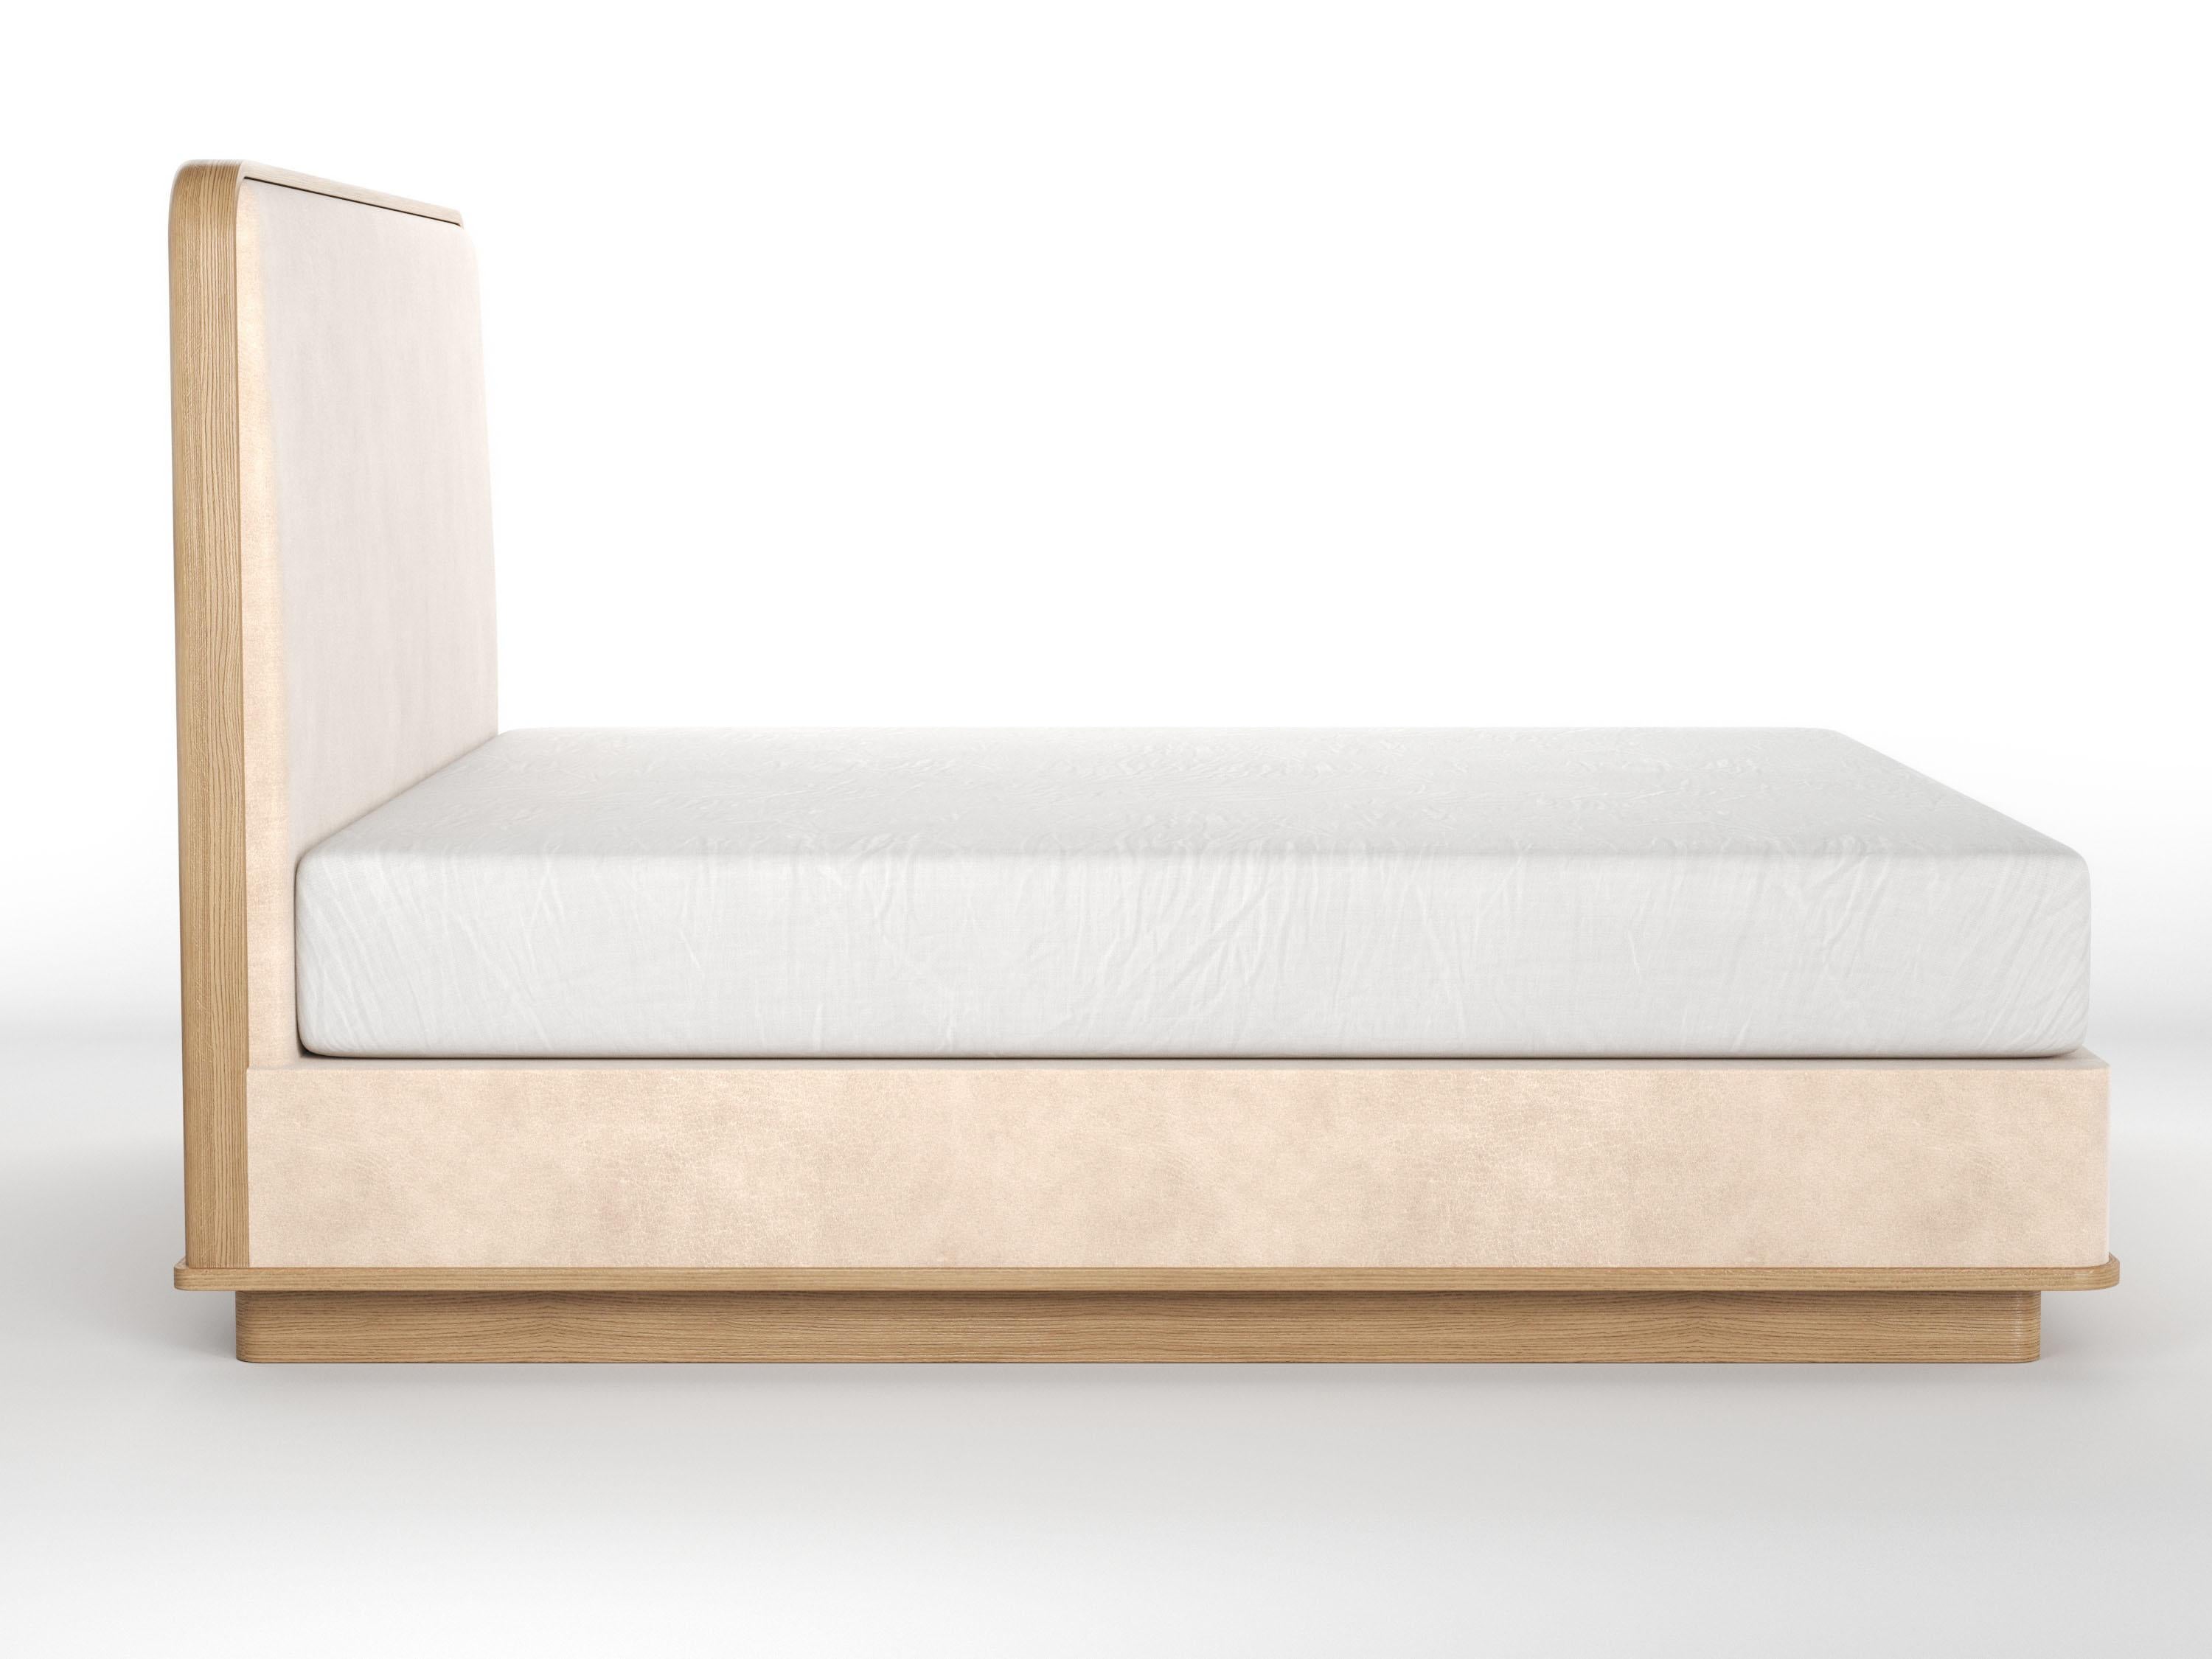 The Cooper bed shown with plain covered headboard panel clad with wood trim - with self covered rails and sitting on wood platform and recessed wood base. All hand made in our shop in Brooklyn, New York by our artisans. This item is only made custom